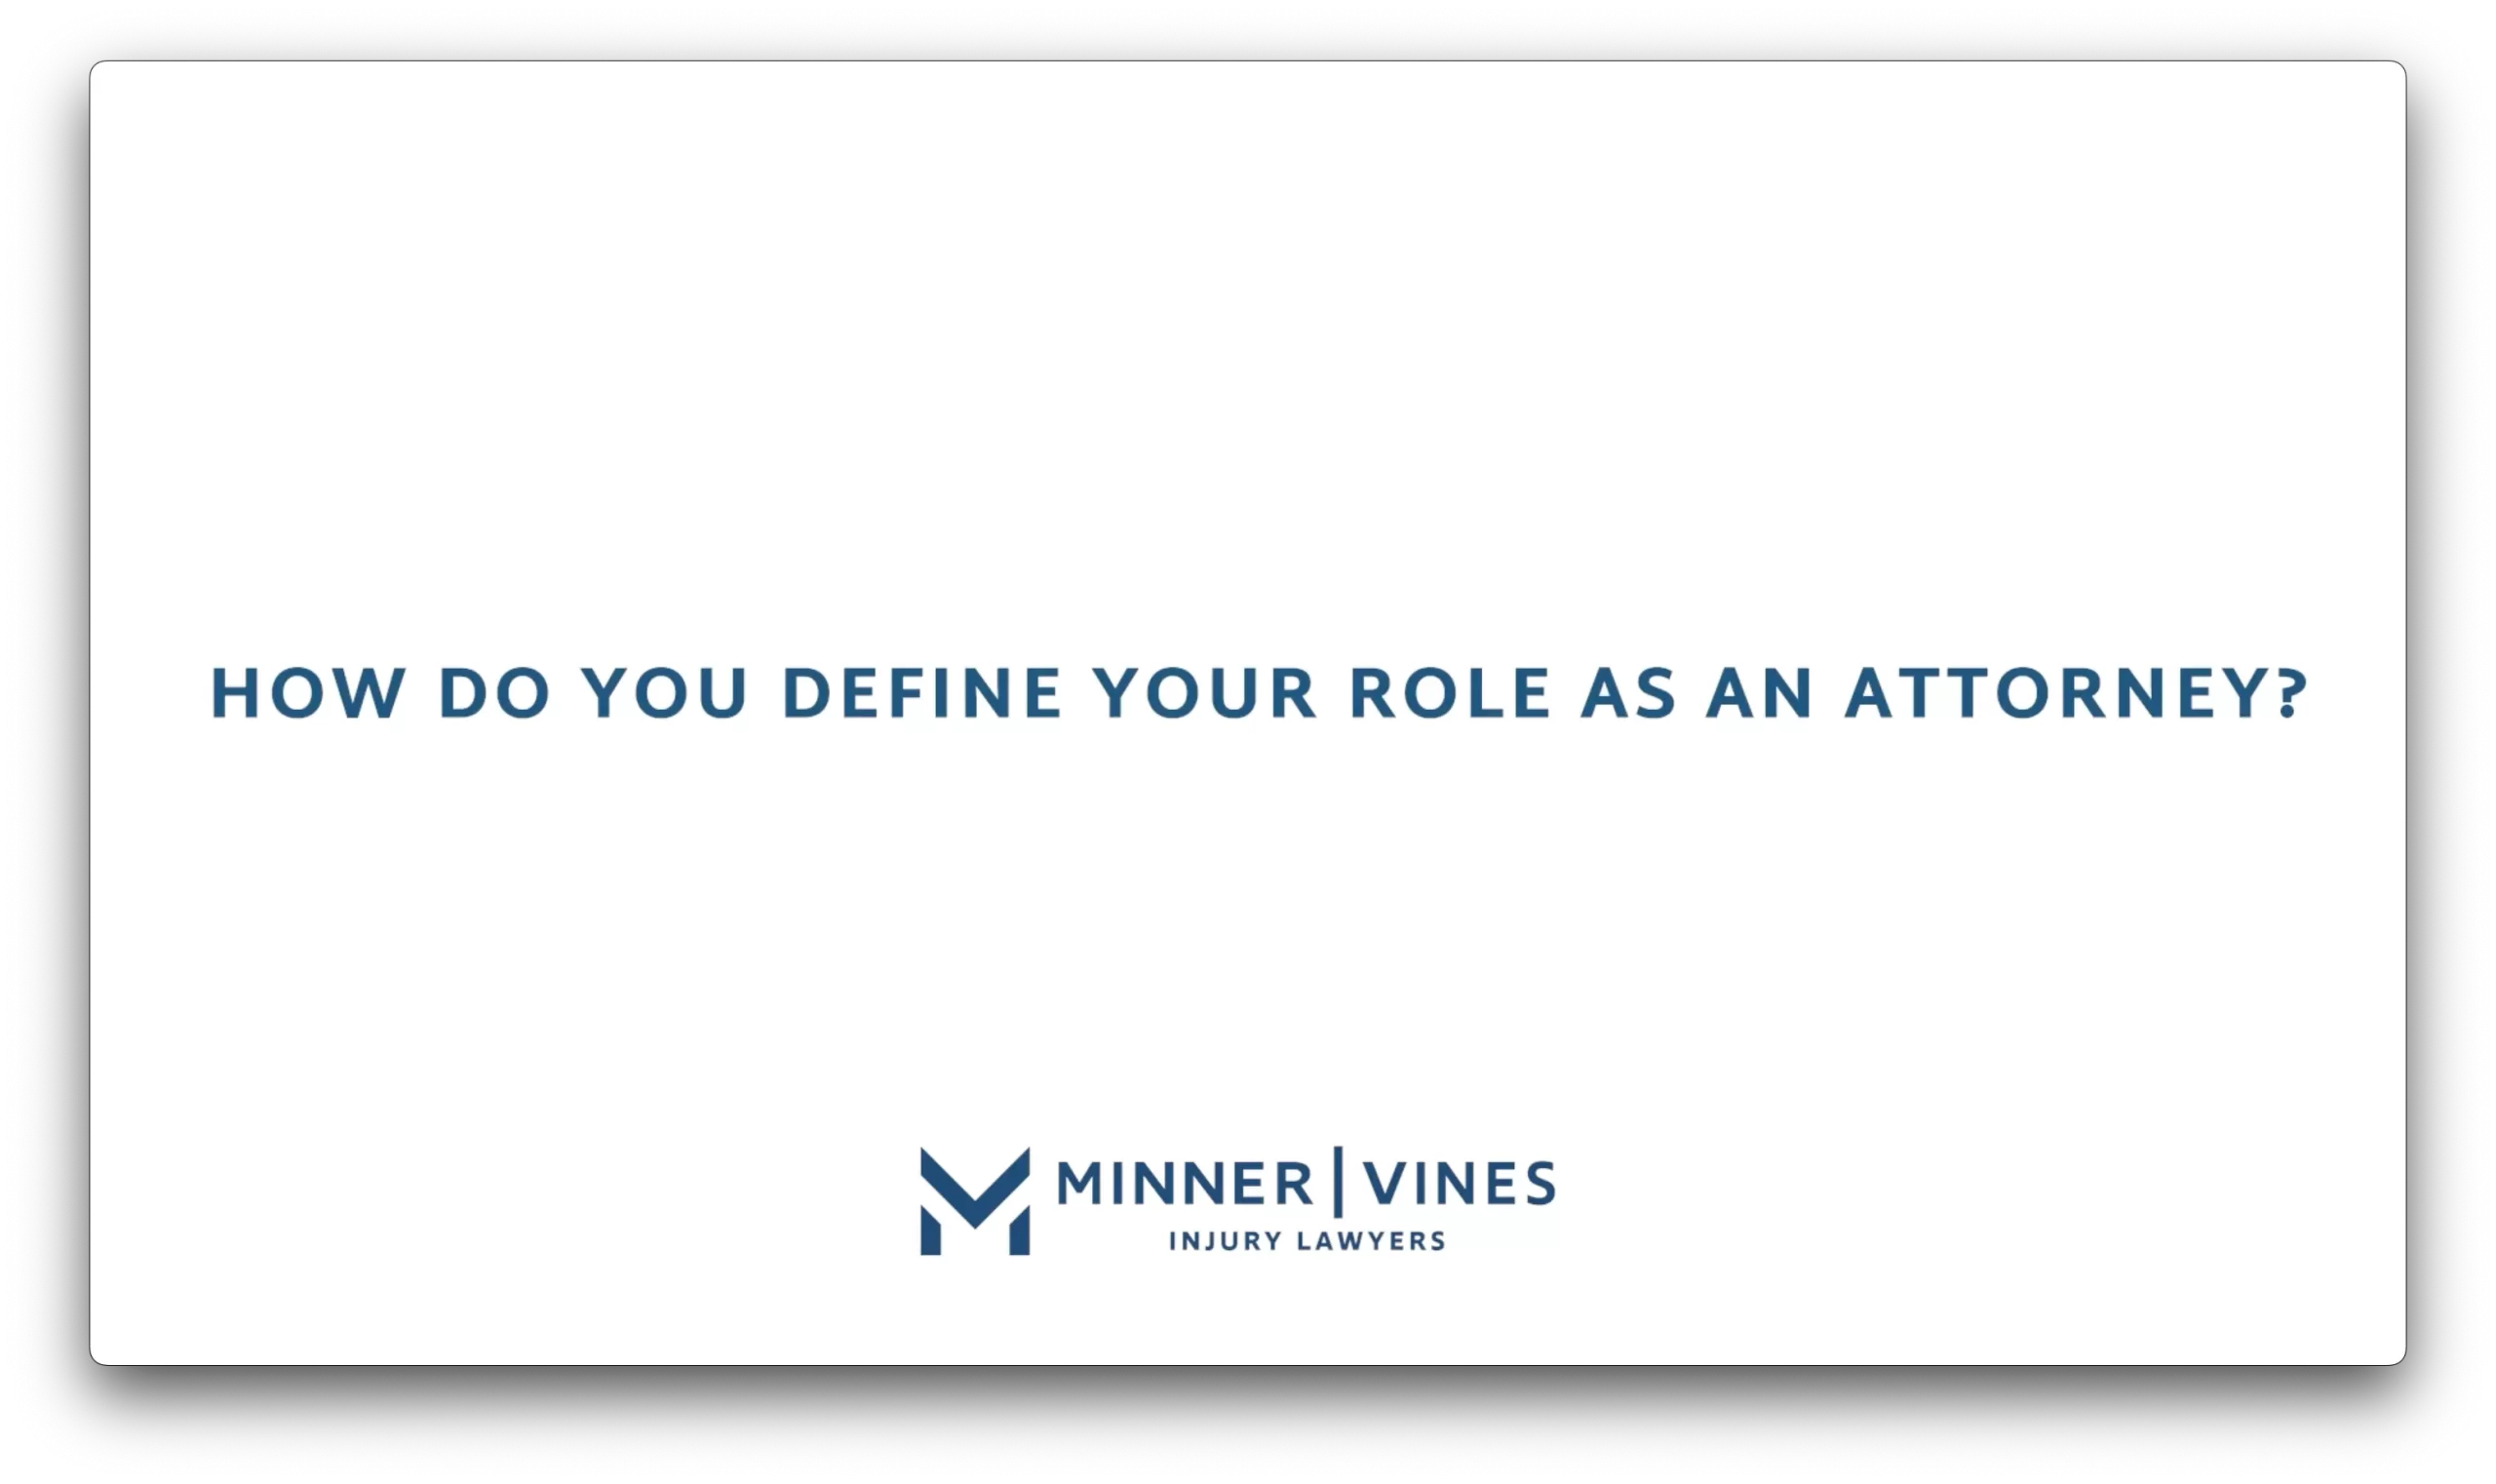 How do you define your role as an attorney?